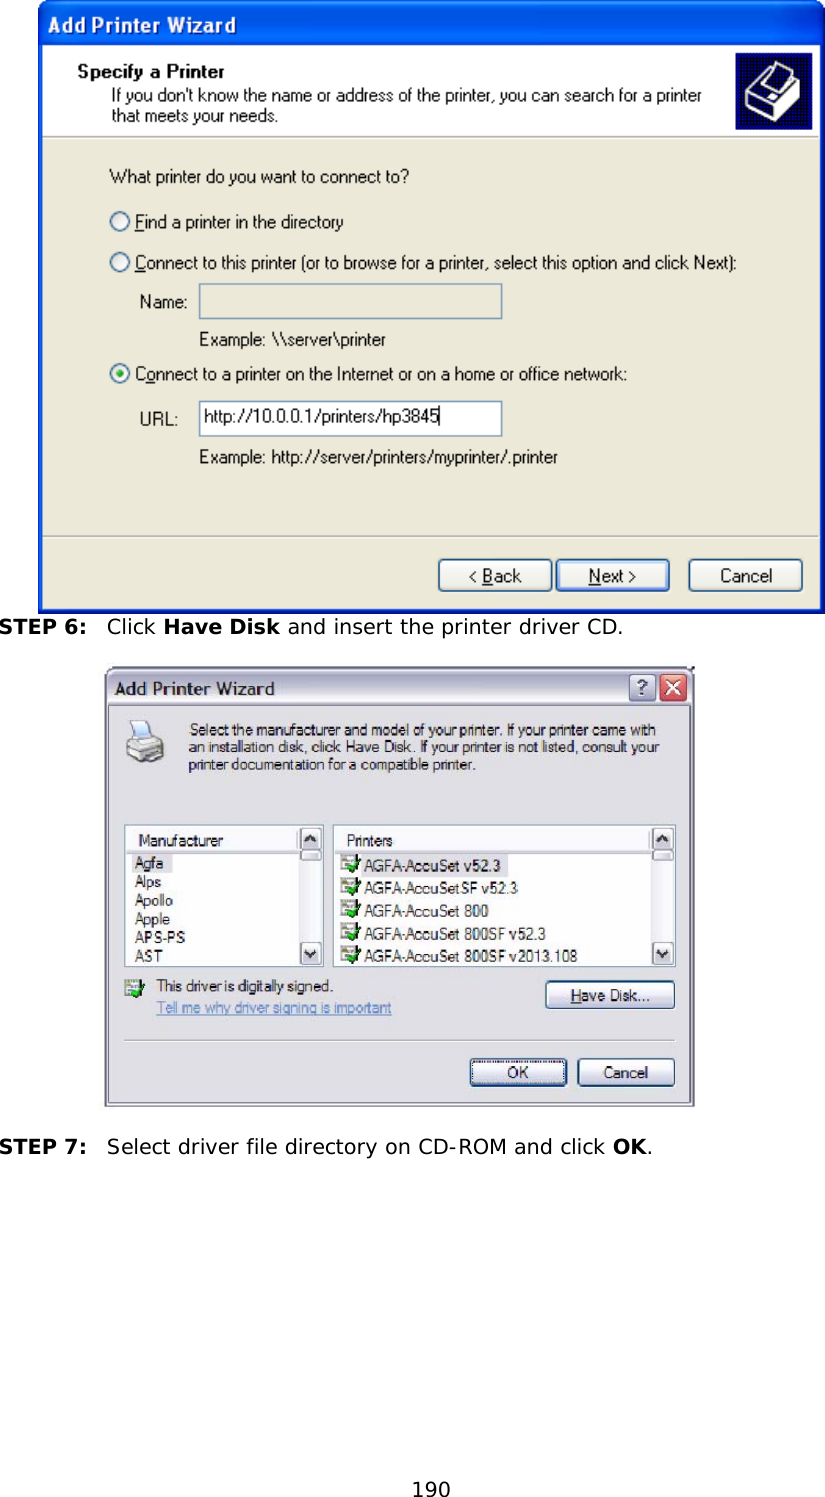  190  STEP 6:  Click Have Disk and insert the printer driver CD.       STEP 7:  Select driver file directory on CD-ROM and click OK.  